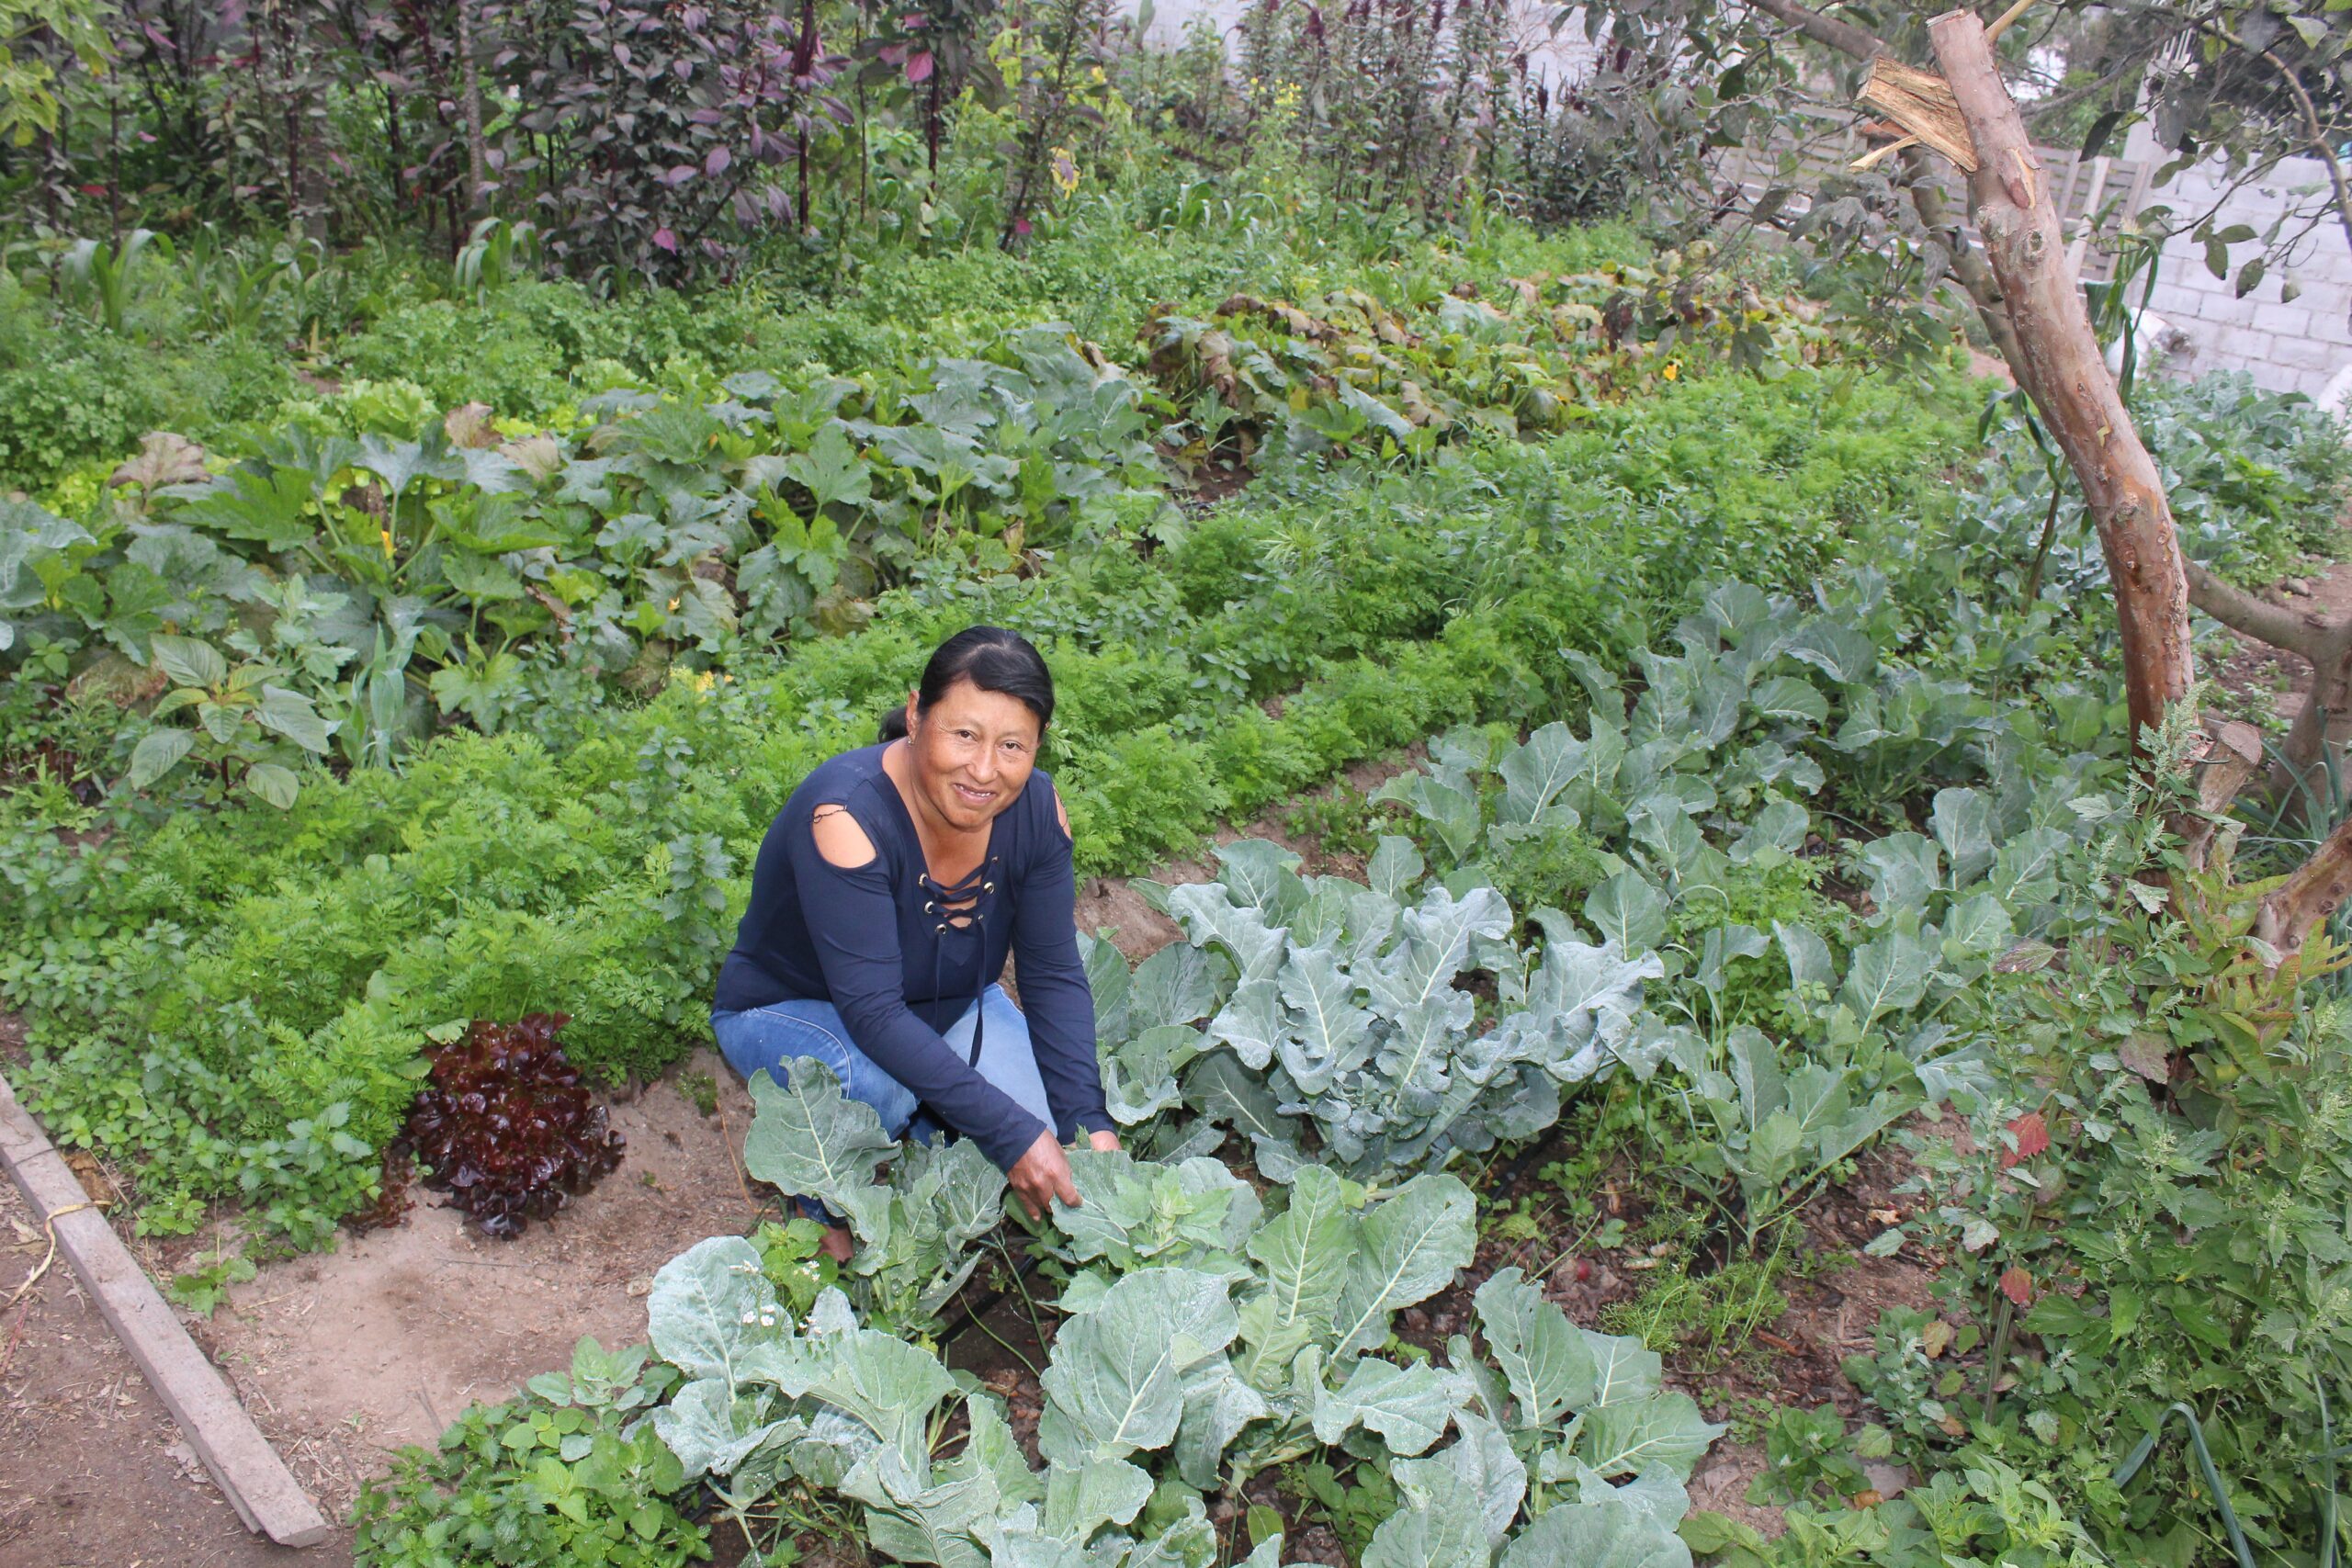 Addressing Gender Inequalities in Quito’s Food System